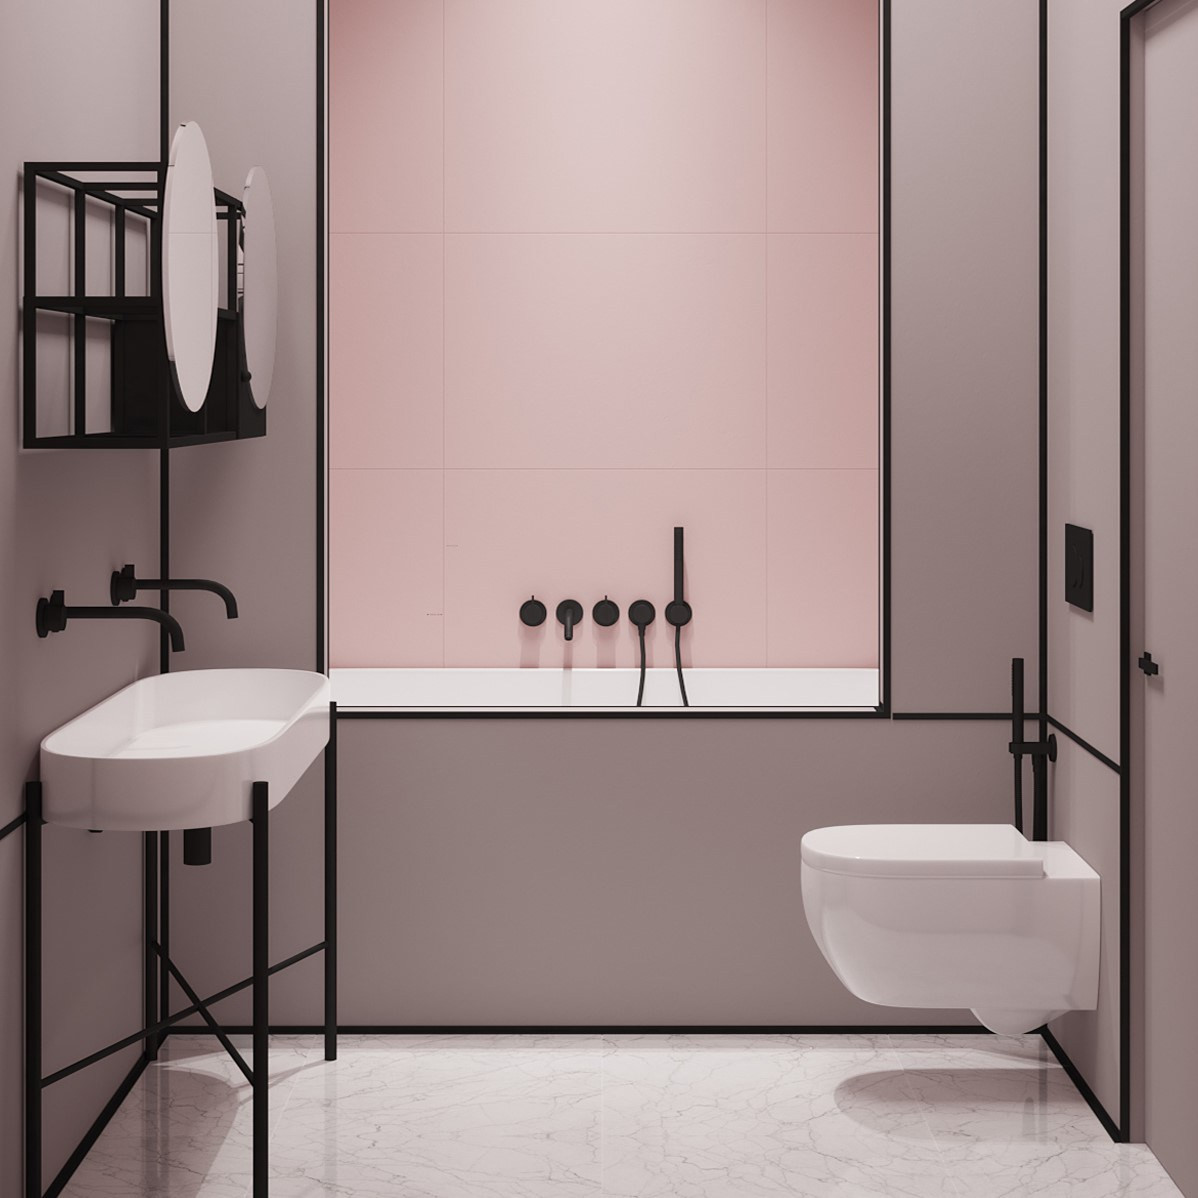 2020 Bathroom Colors
 Designs Colors and Tiles Ideas 8 Bathroom trends for 2020